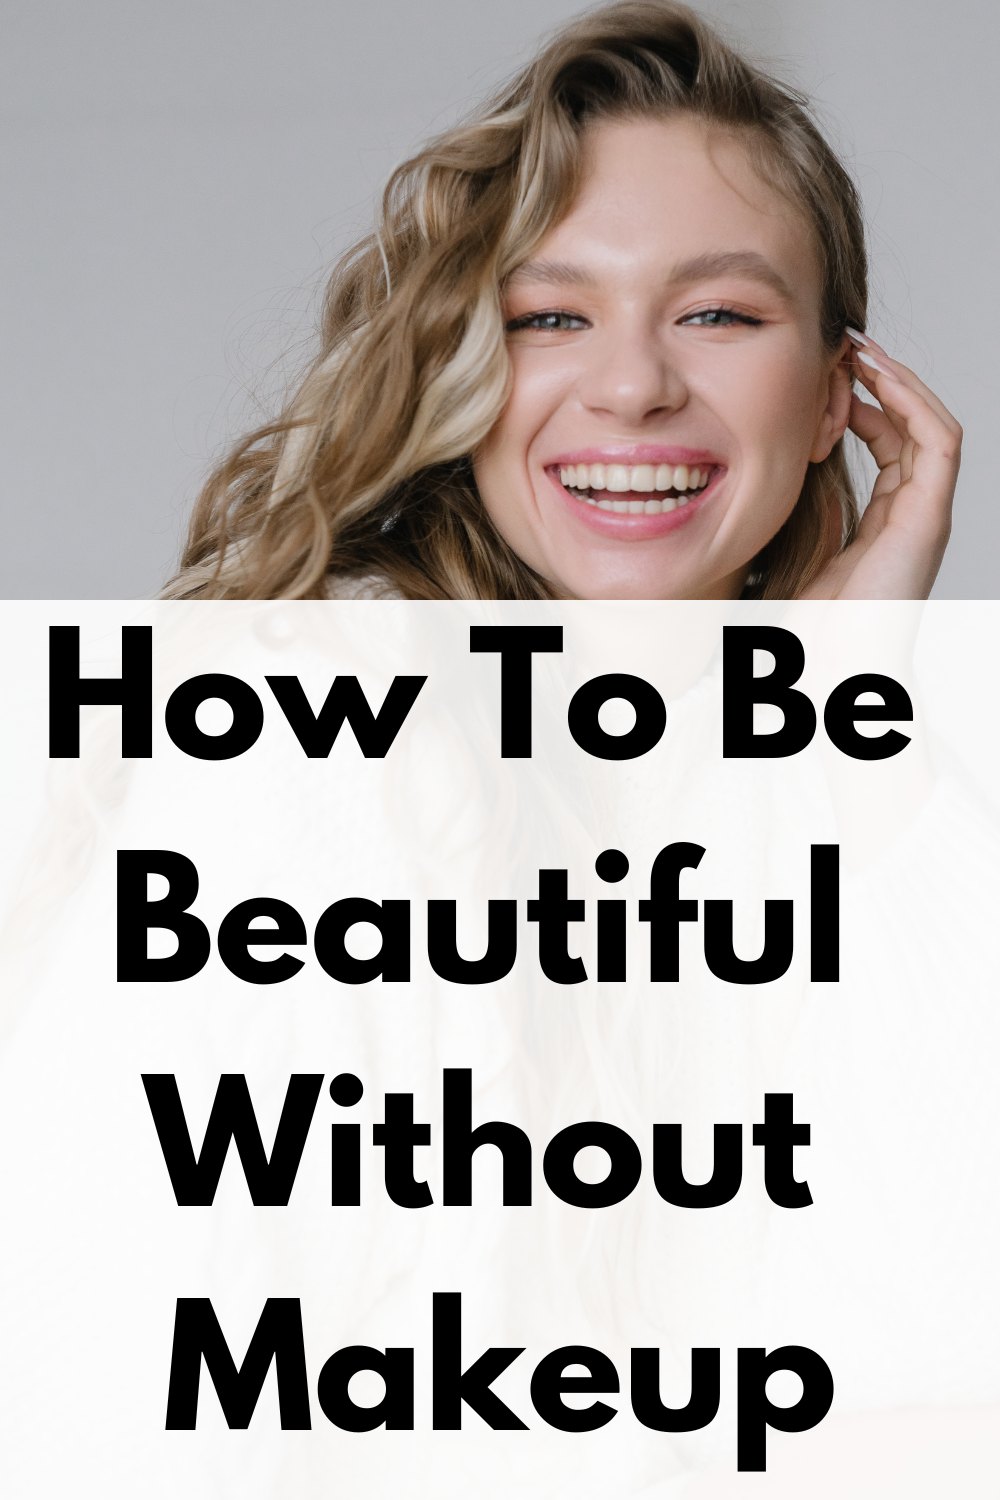 How To Be Beautiful Without Makeup